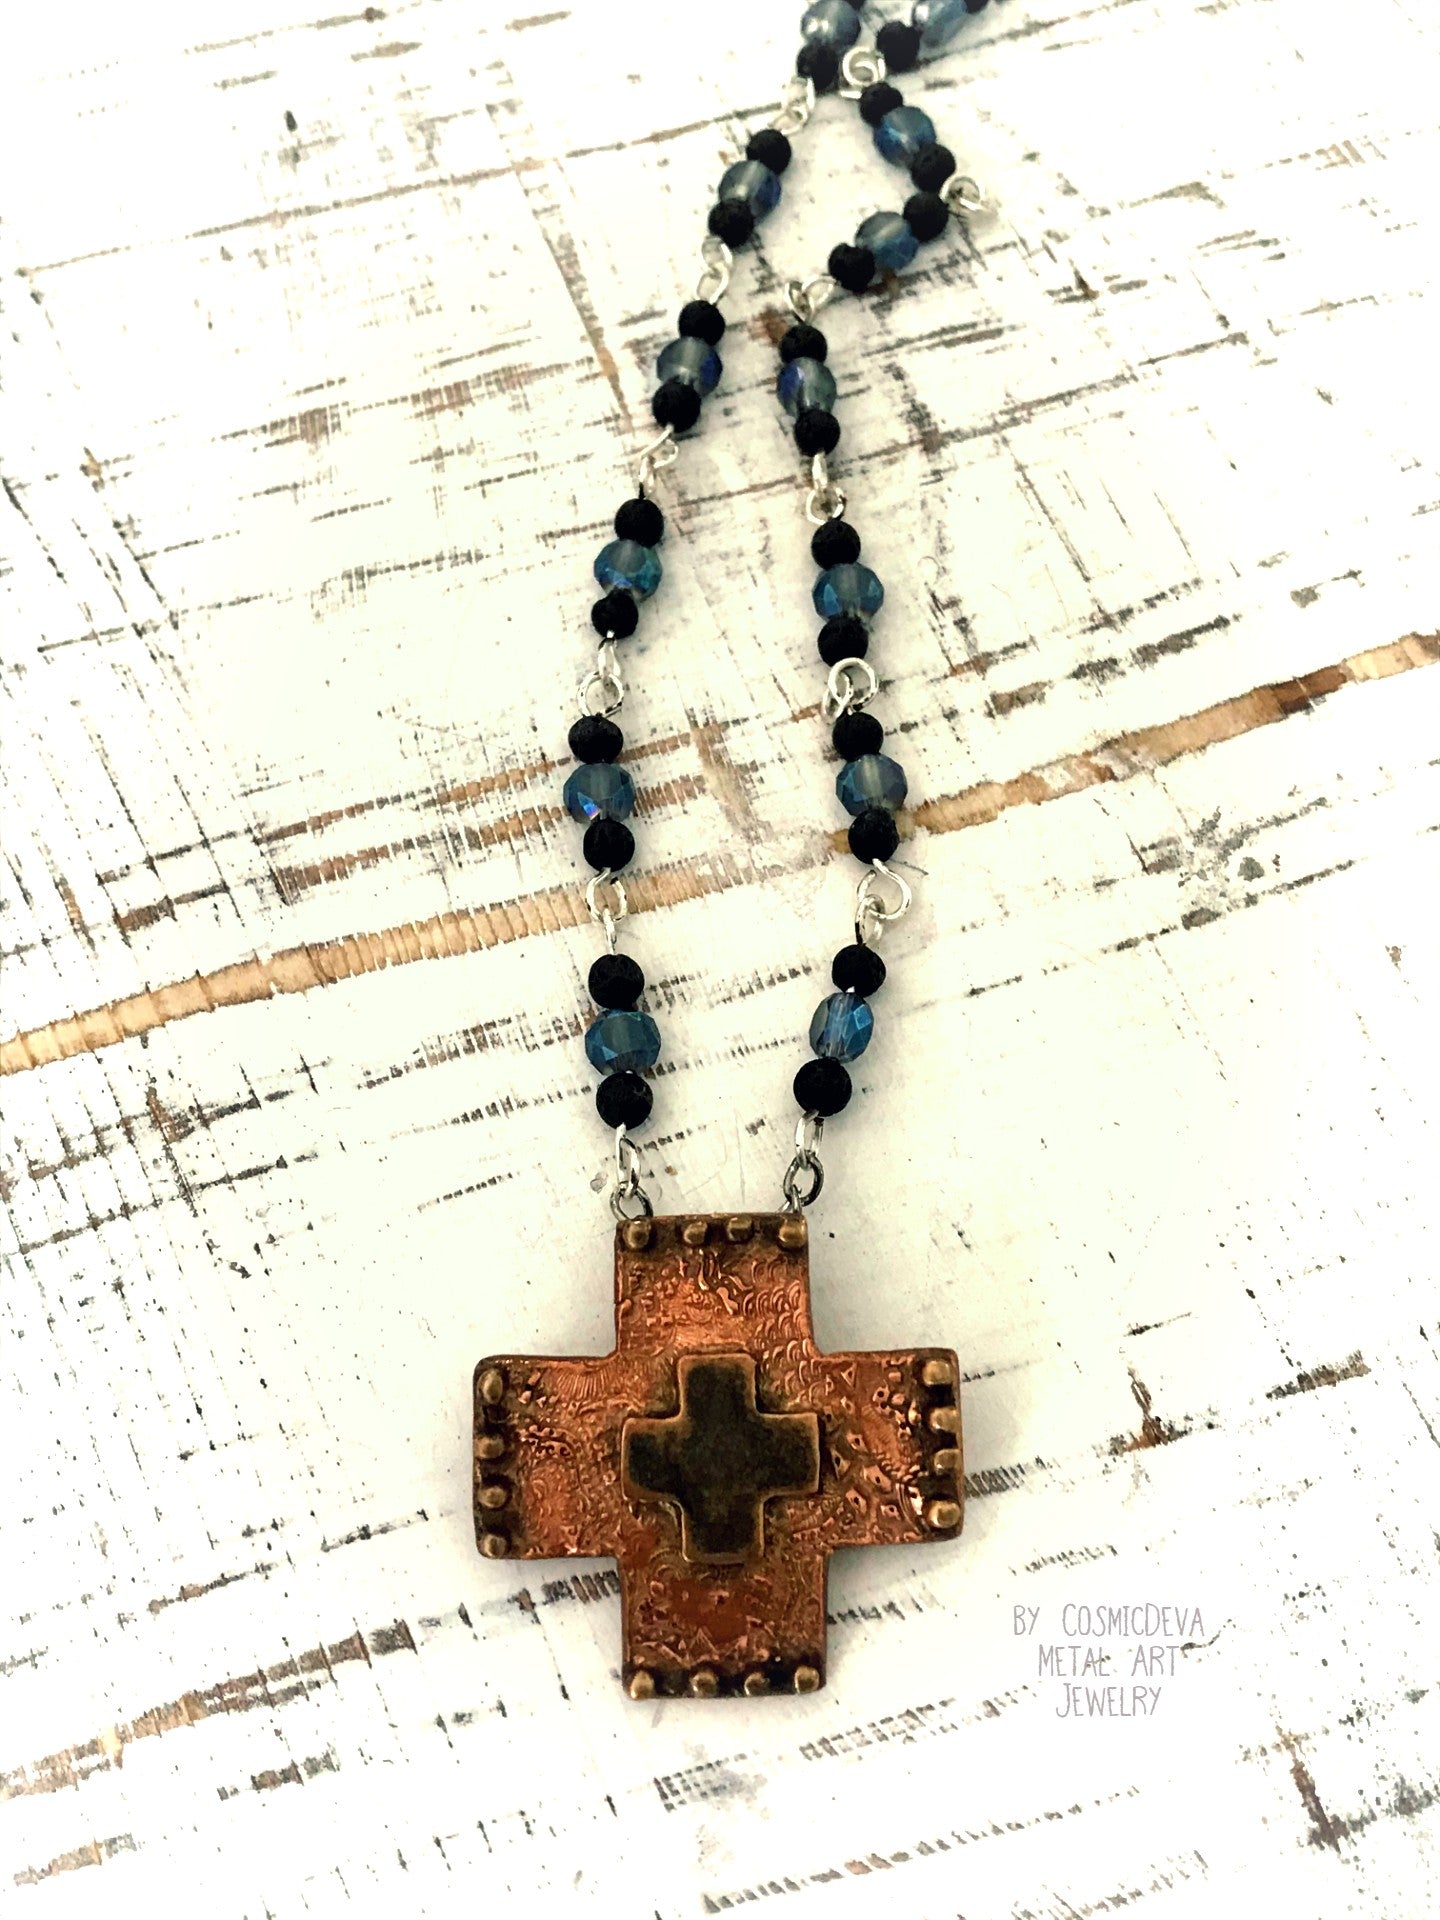 Copper Cross Rosary Necklace, Boho Faith Jewelry. A beautiful completely handmade and kiln fired western cross pendant made of solid pure copper dangles from a rosary necklace with gorgeous petite blue Czech beads and black lava beads. The handmade rosary chain is made of .925 sterling silver plated wire with sparkling blue faceted Czech glass beads and small black volcanic lava stone beads. A pretty little heart is stamped with the artist’s logo on the backside adding a lovely detail. - CosmicDeva